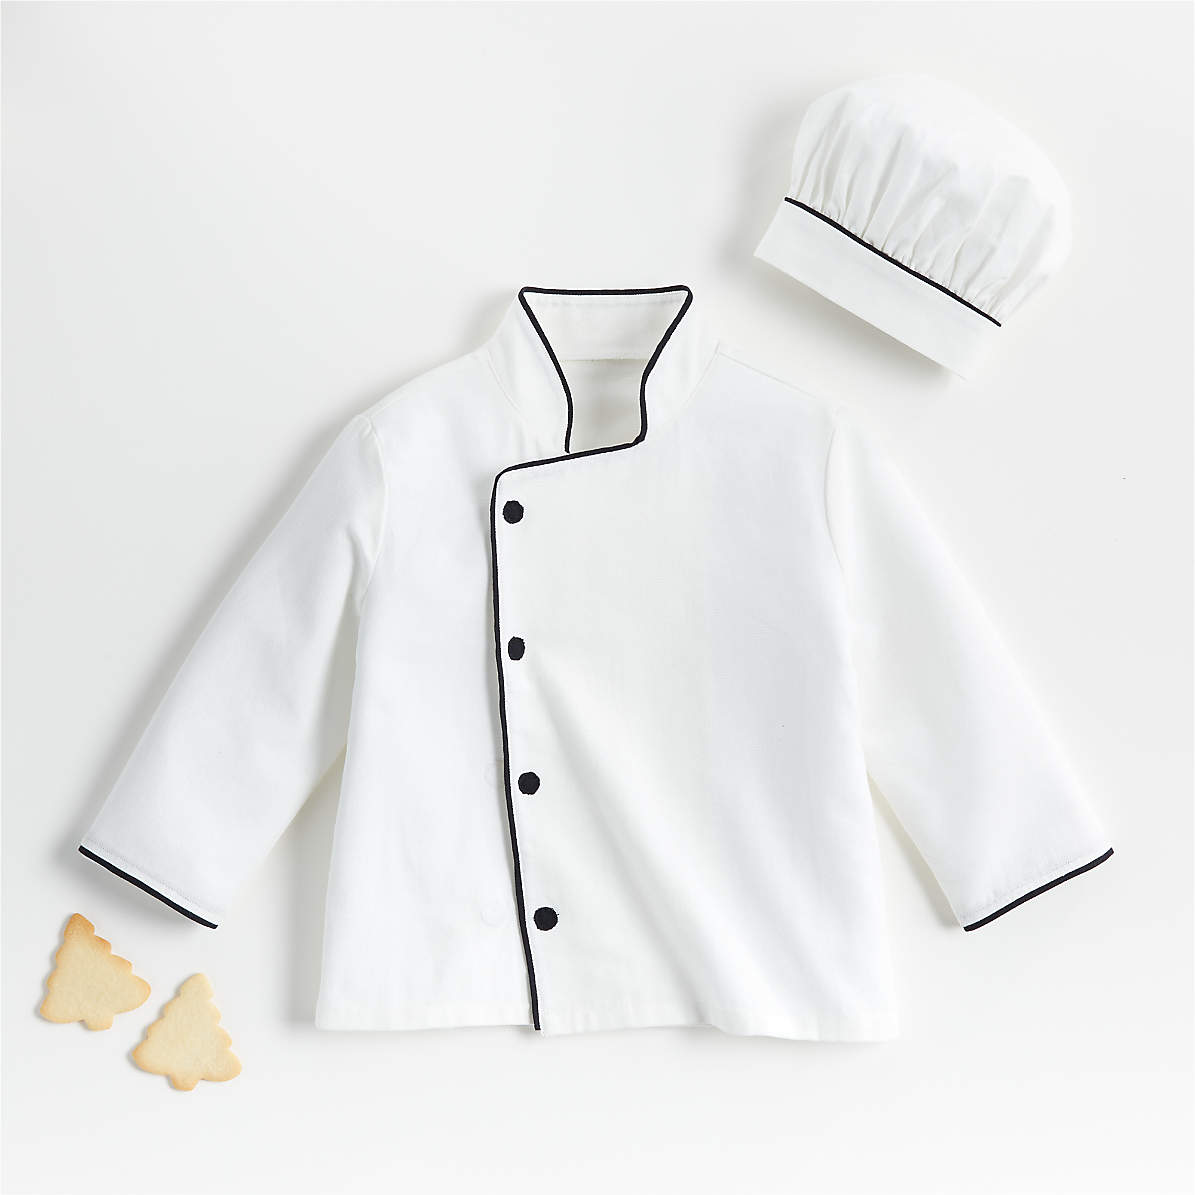  Quality Chef Apparel and Chef Clothing with Free Shipping